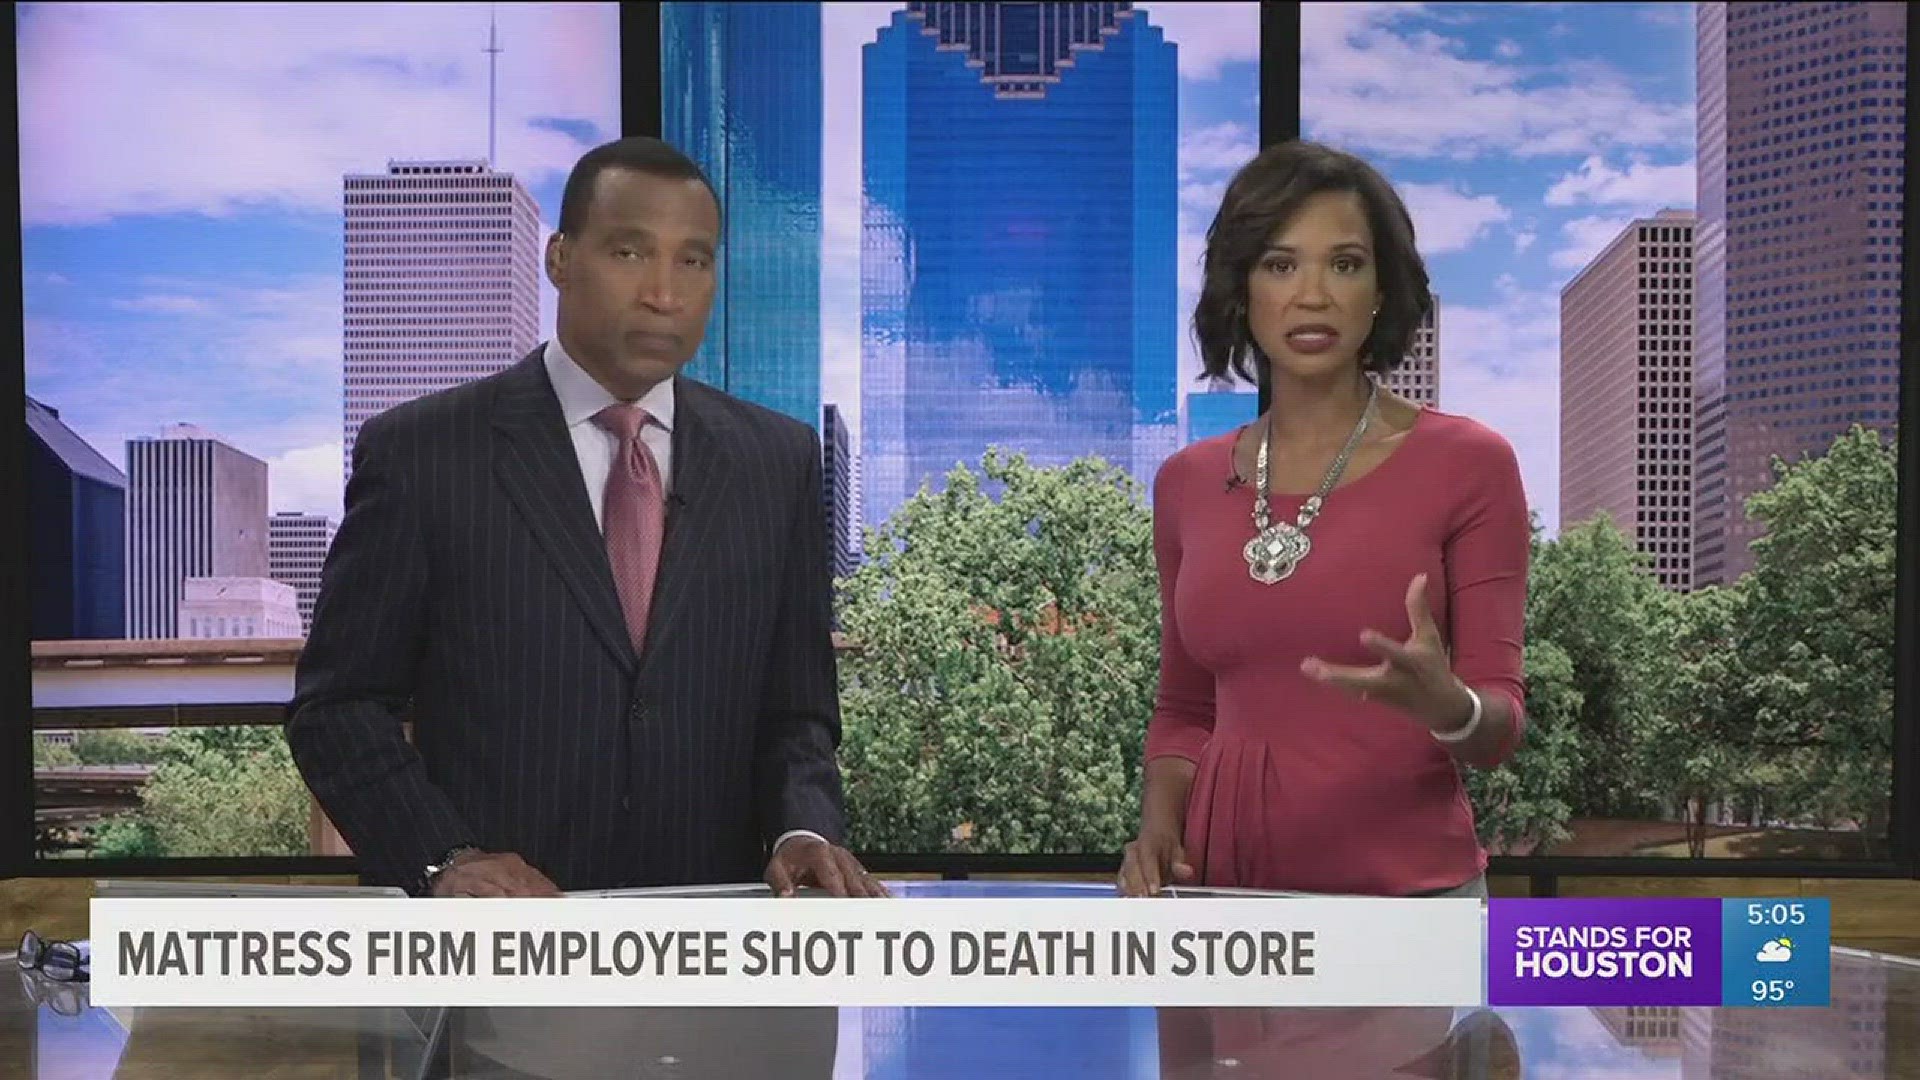 Top headlines at 5 p.m. include what we learned about dozens of people buried in unmarked graves in a Sugar Land field and a Mattress Firm employee shot to death inside store.